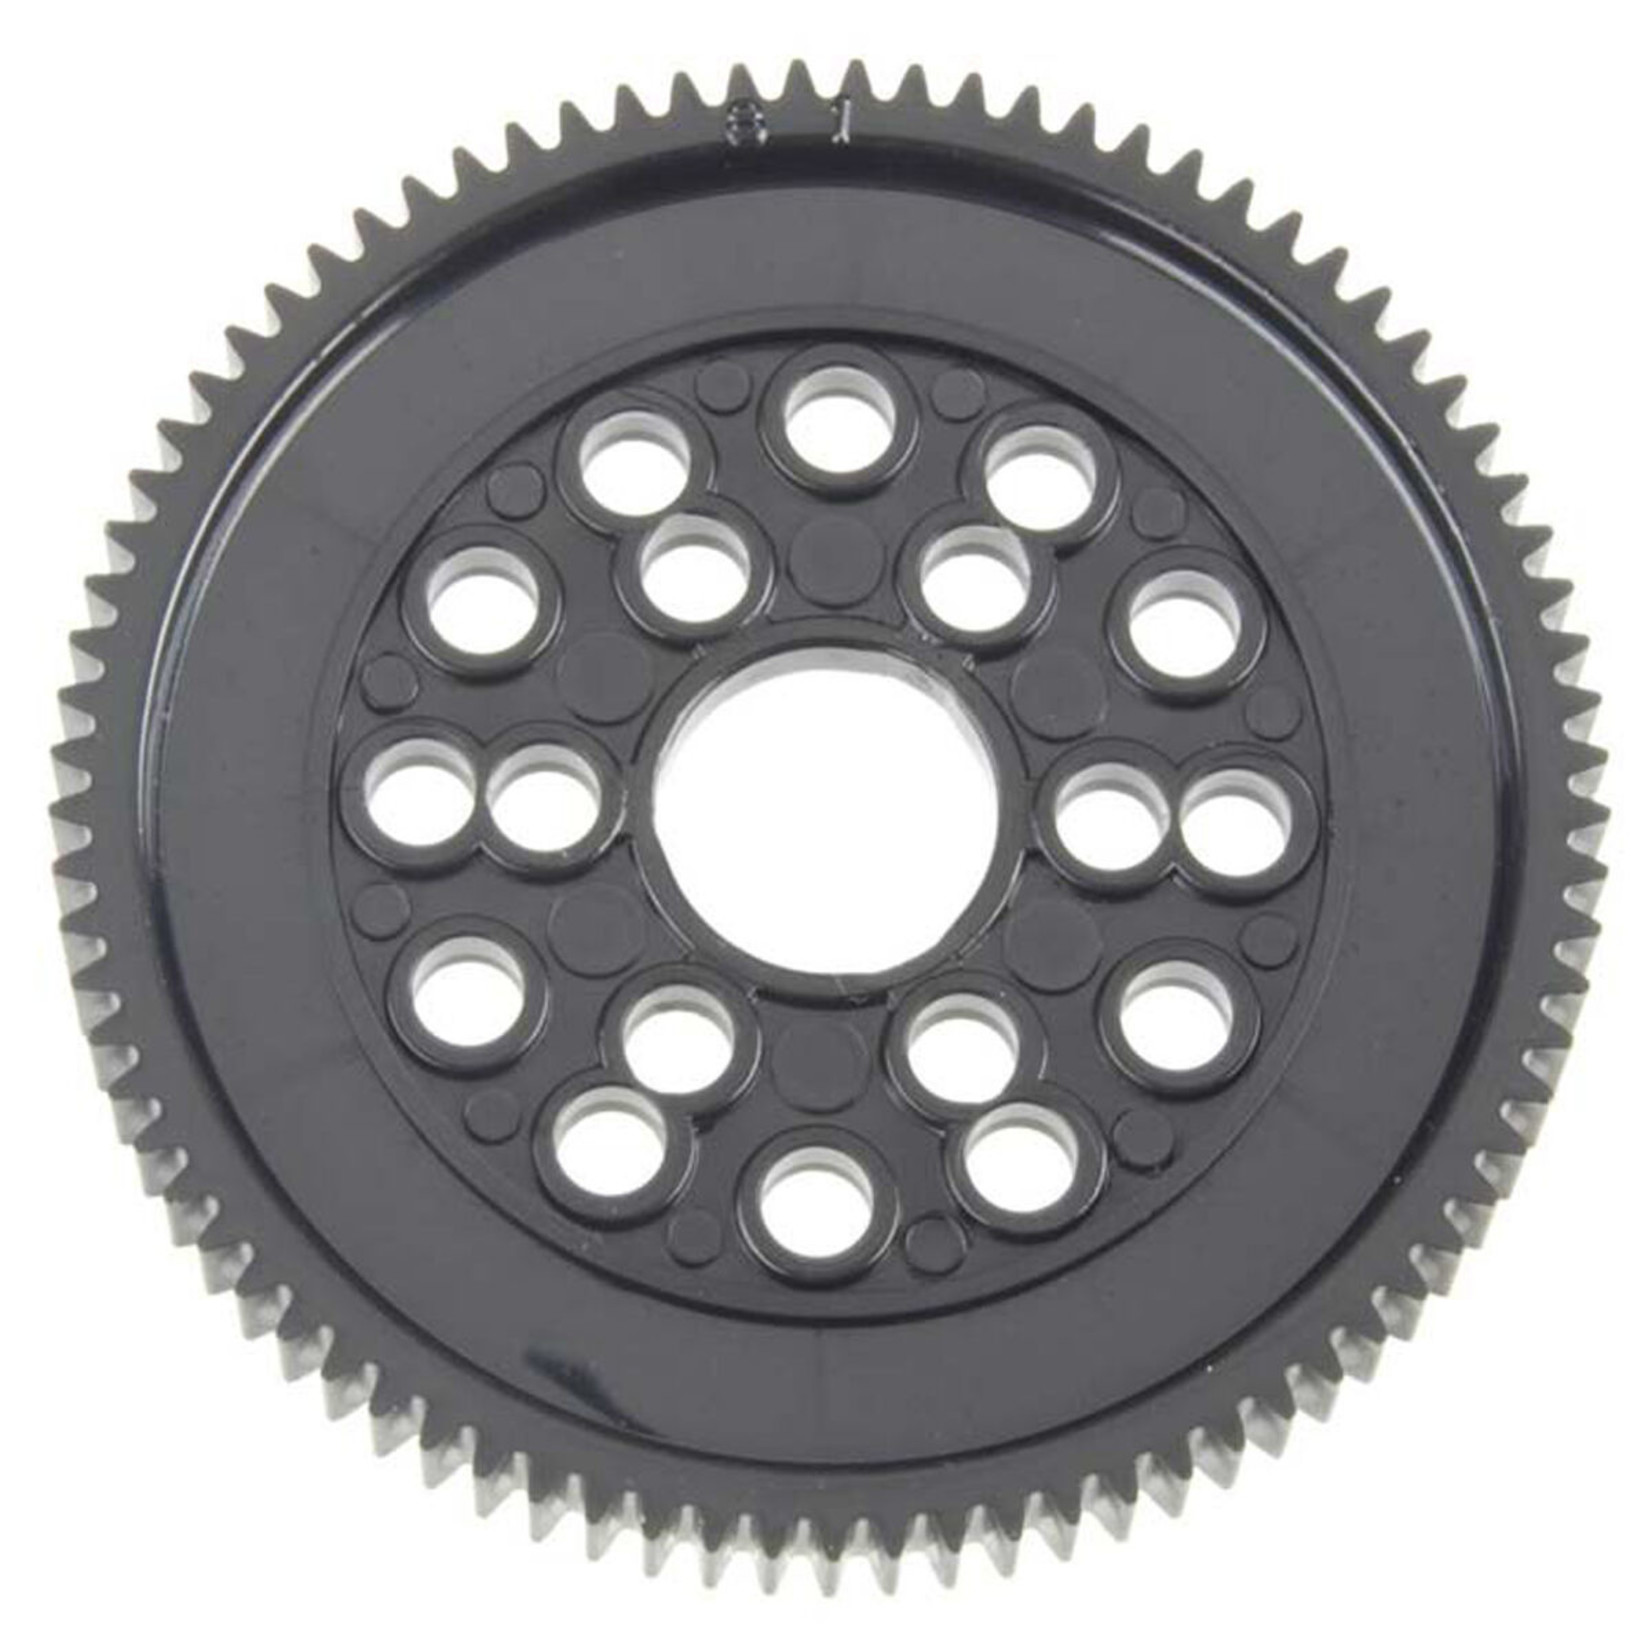 RJ Speed Diff Gear, 81-Tooth